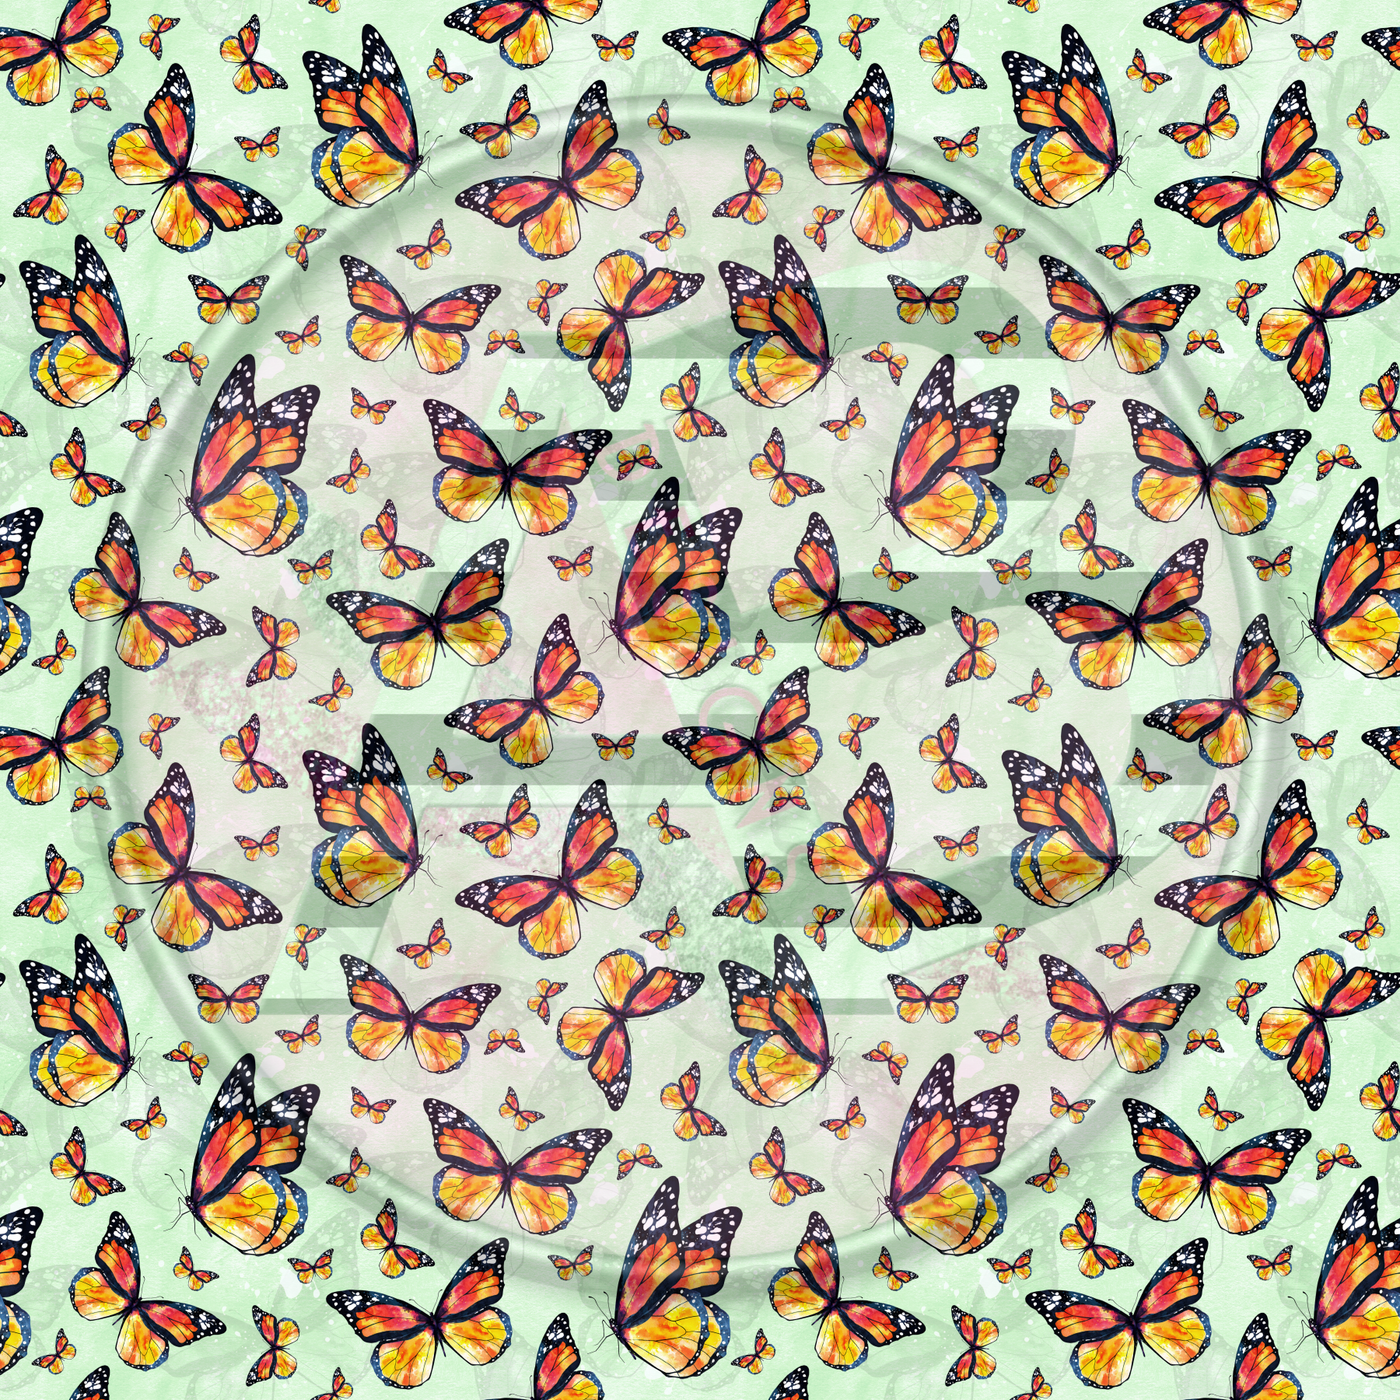 Adhesive Patterned Vinyl - Butterfly 06 Smaller